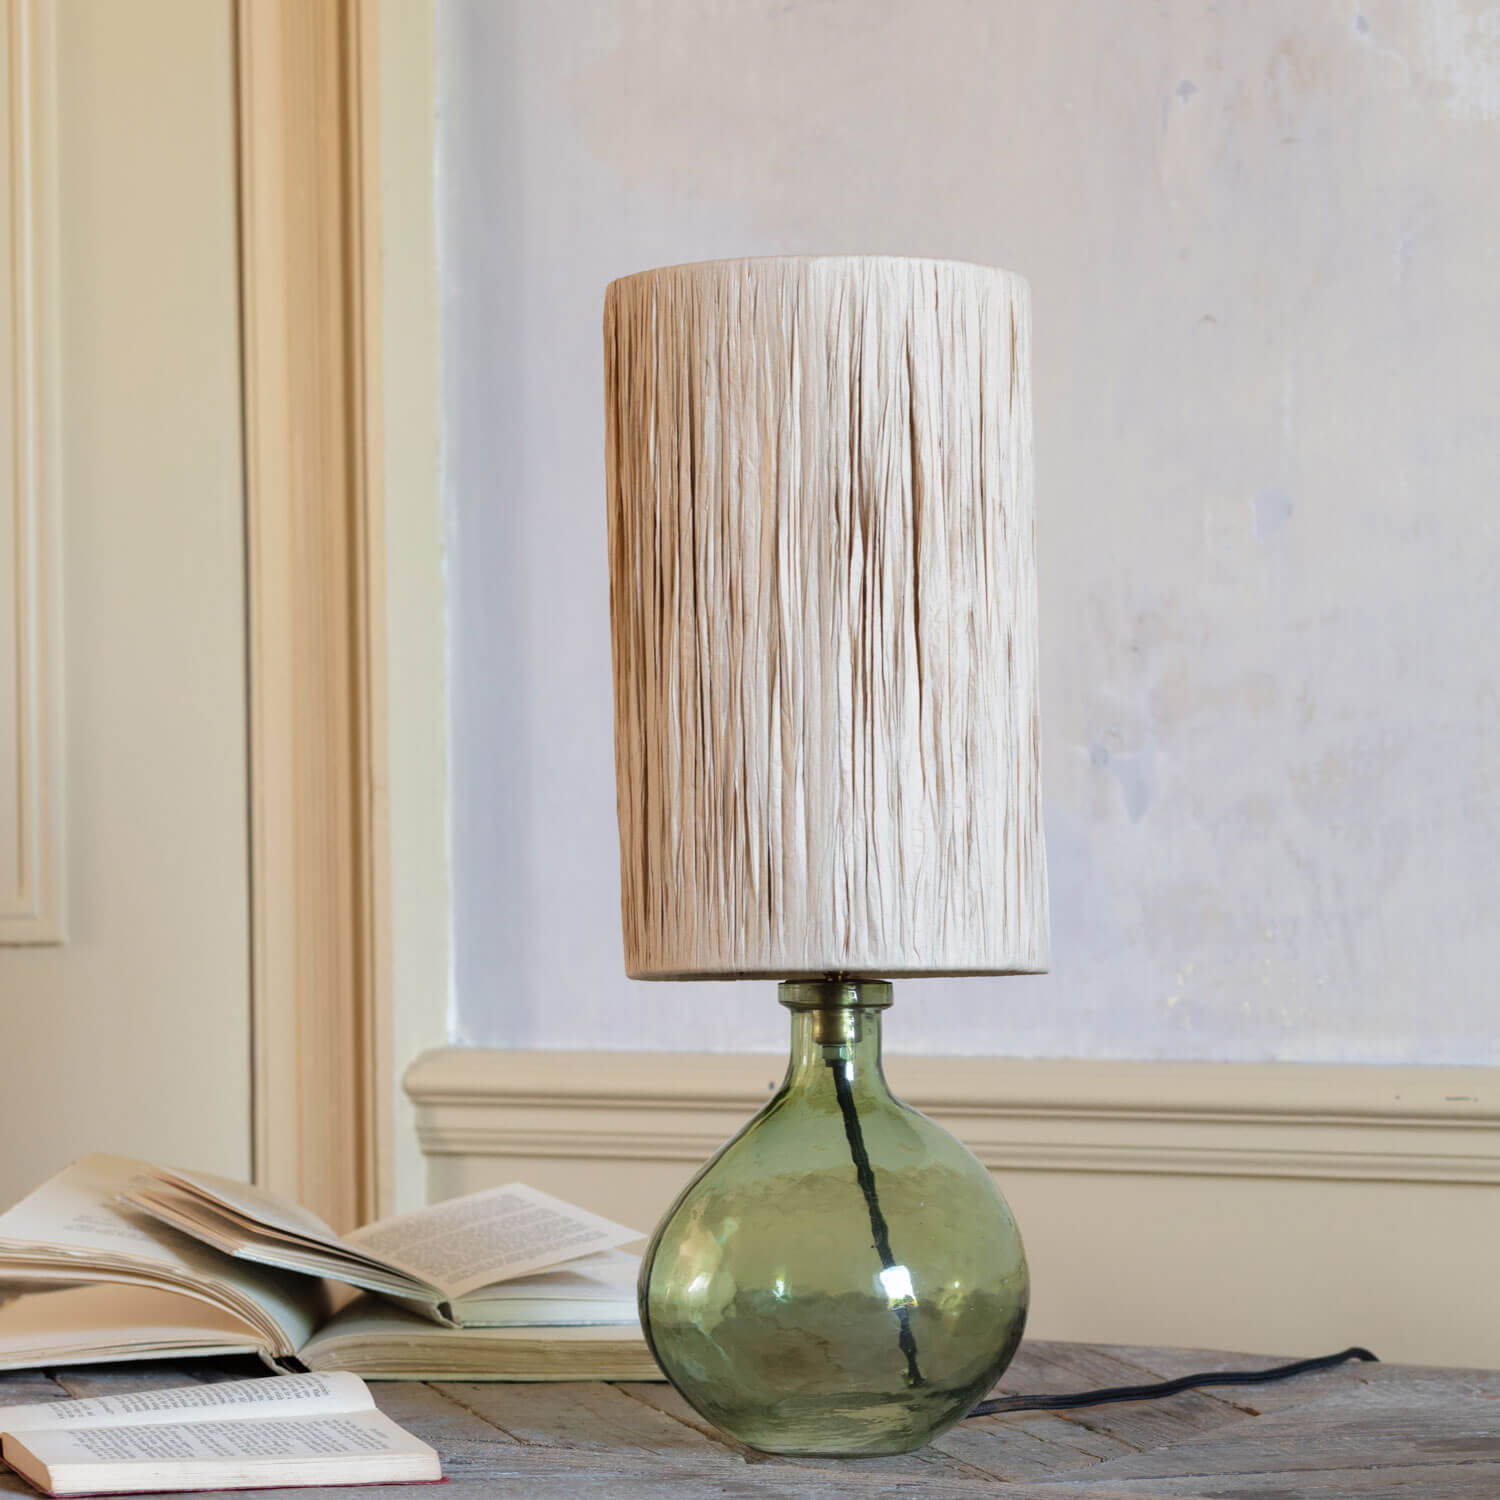 Lennox Light Green Table Lamp with Shade - image 1